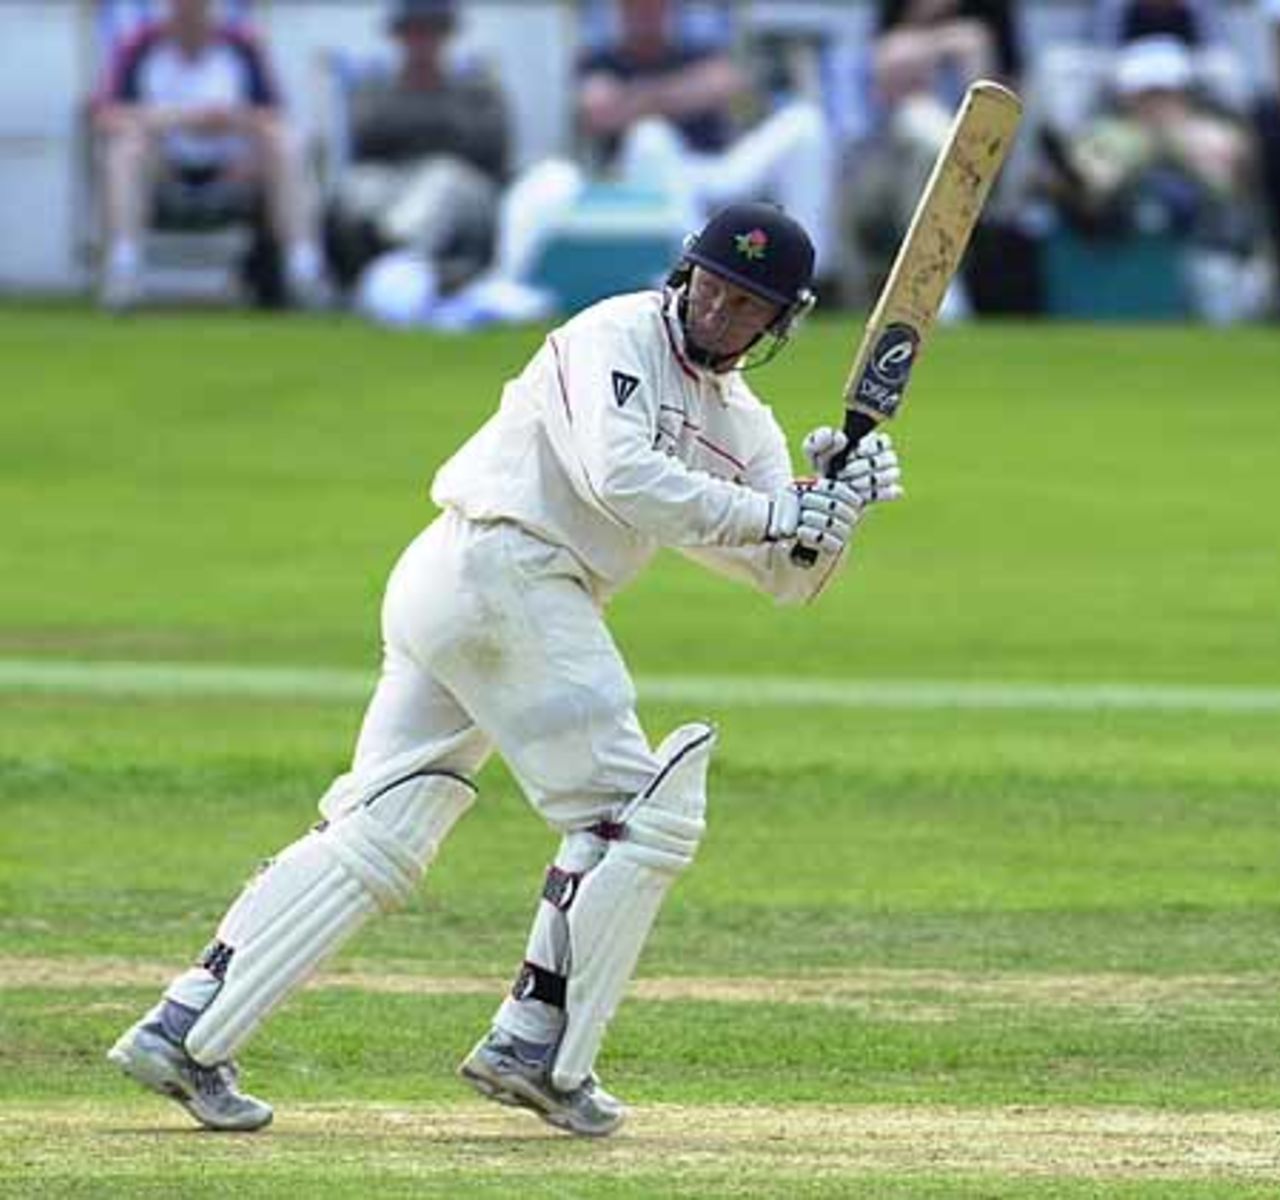 Neil Fairbrother turns a ball round the corner to leg in his innings of 73, C+G Quarter Final, Blackpool, 25 Jul 2001